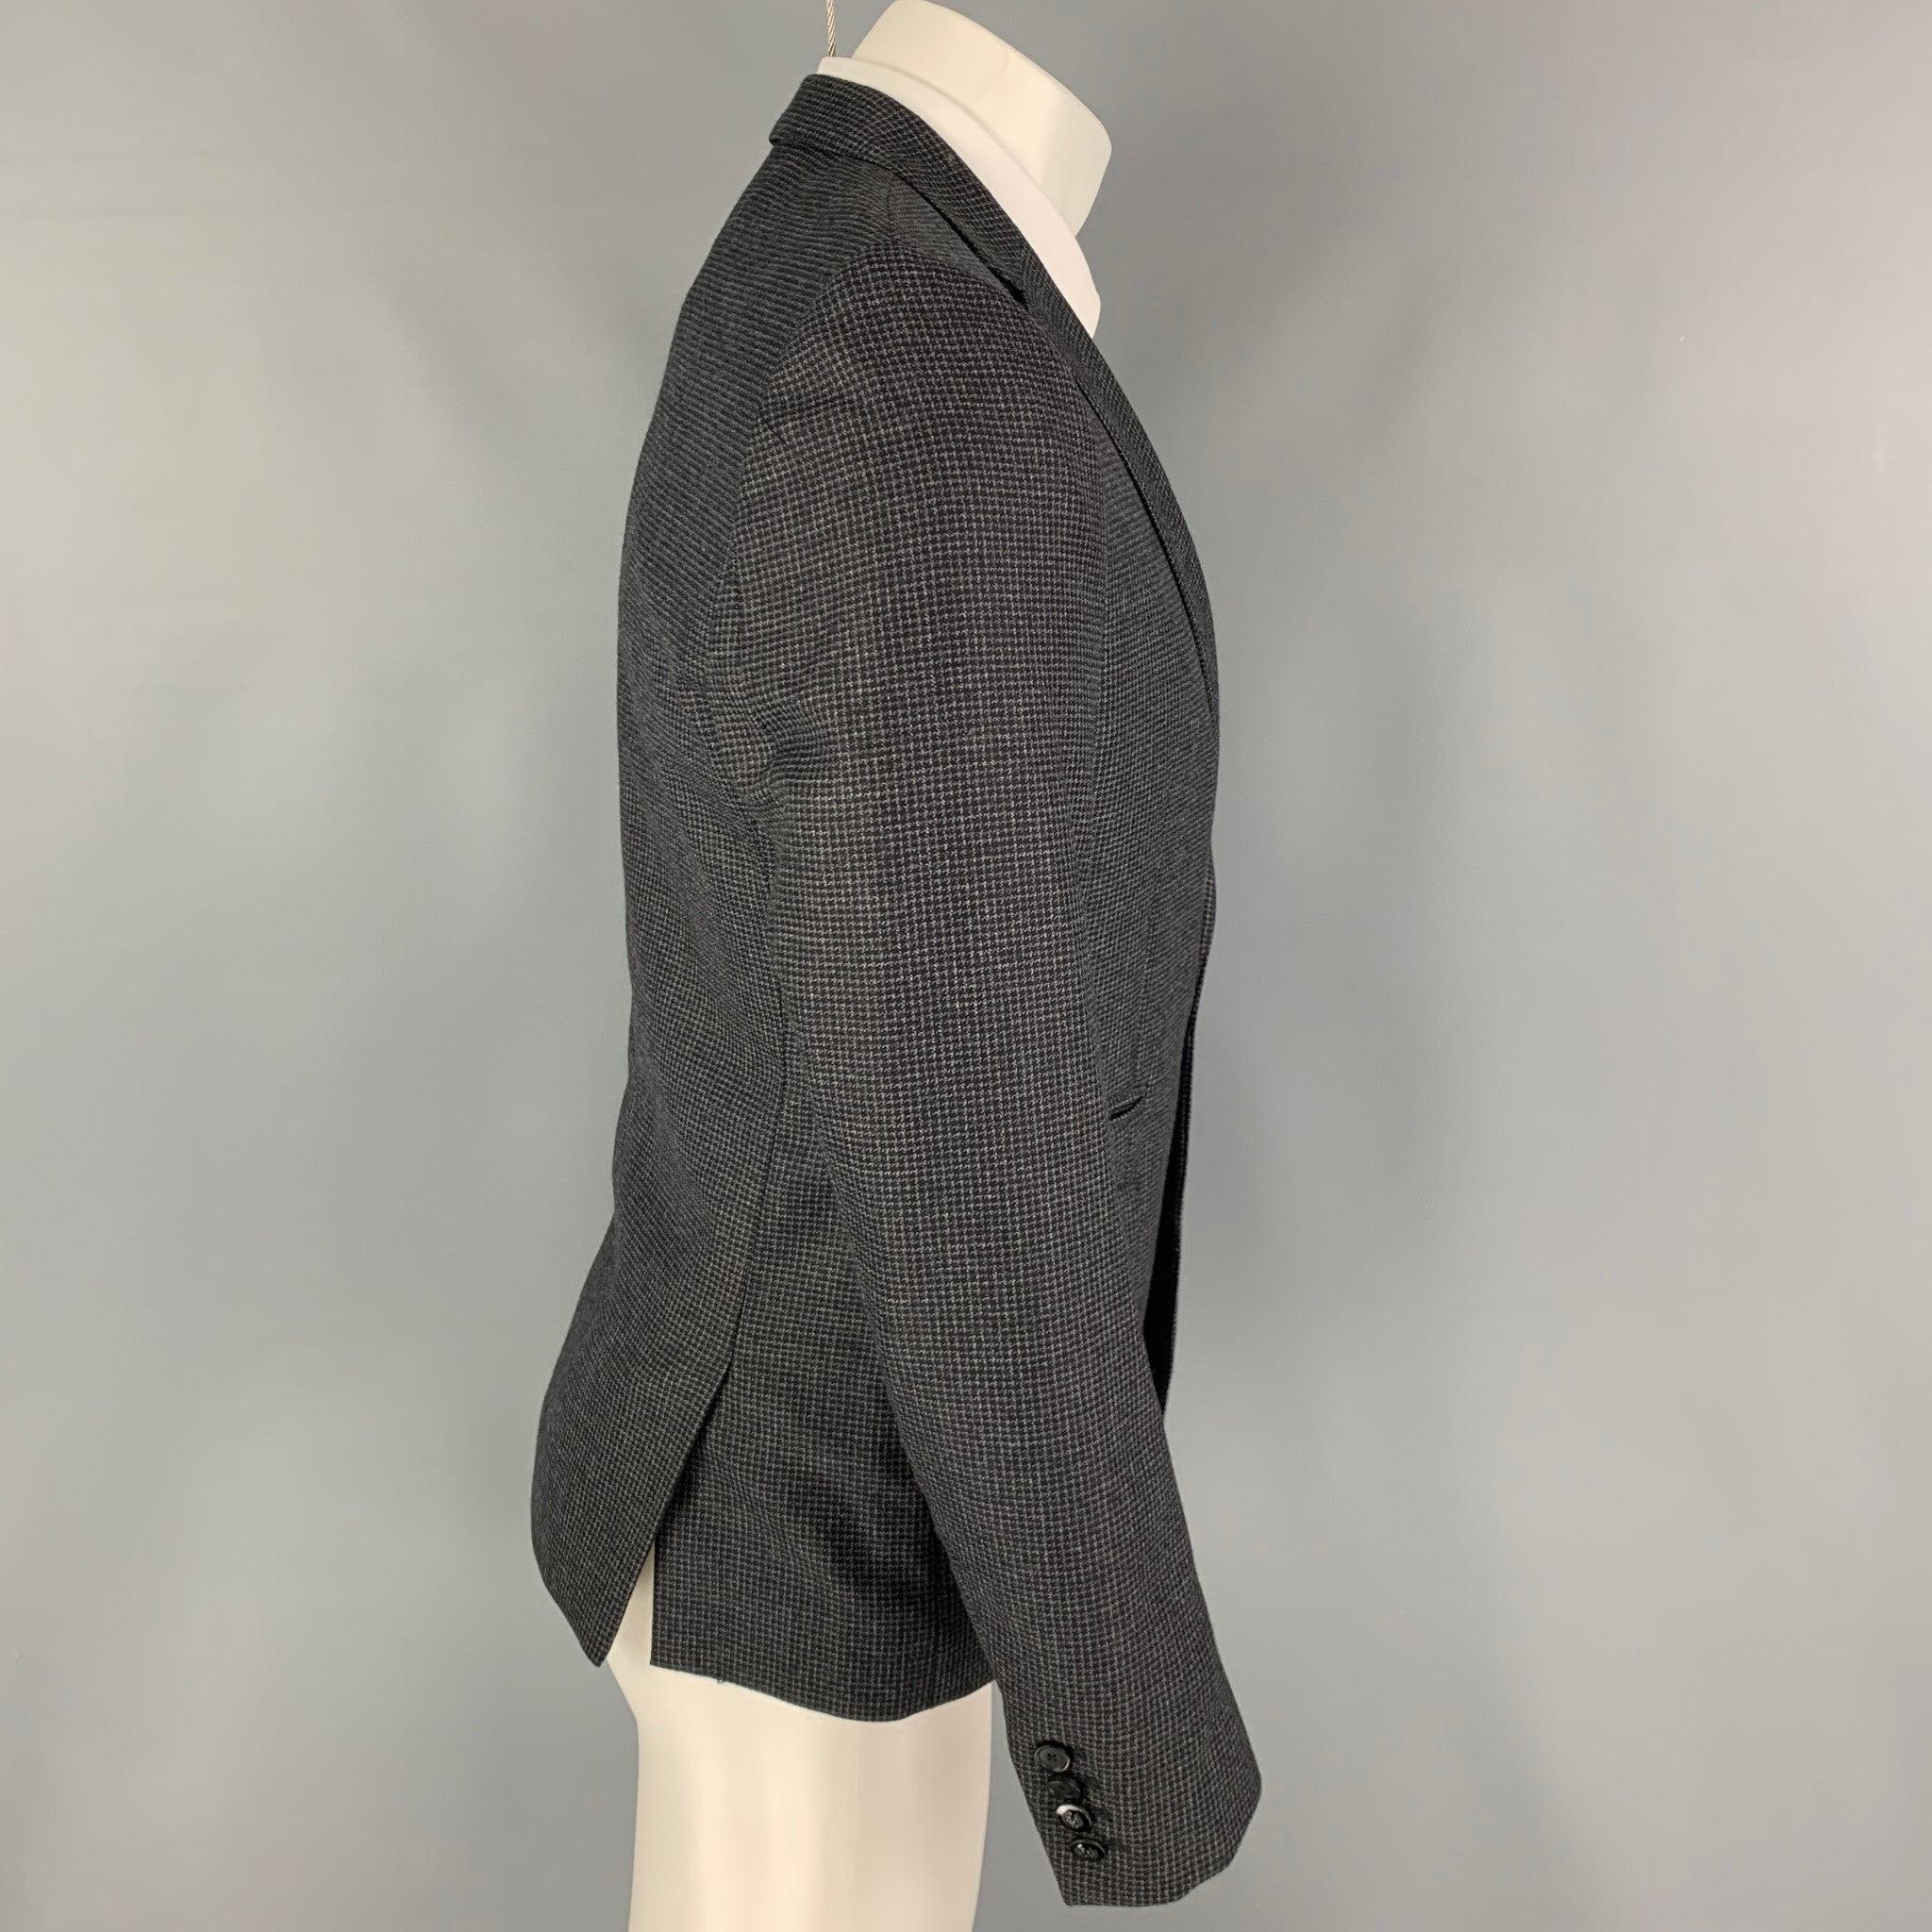 THE KOOPLES sport coat comes in a charcoal grey grid wool with a full liner featuring a notch lapel, flap pockets, double back vent, and a double button closure.
Excellent
Pre-Owned Condition. 

Marked:   46 

Measurements: 
 
Shoulder: 17 inches